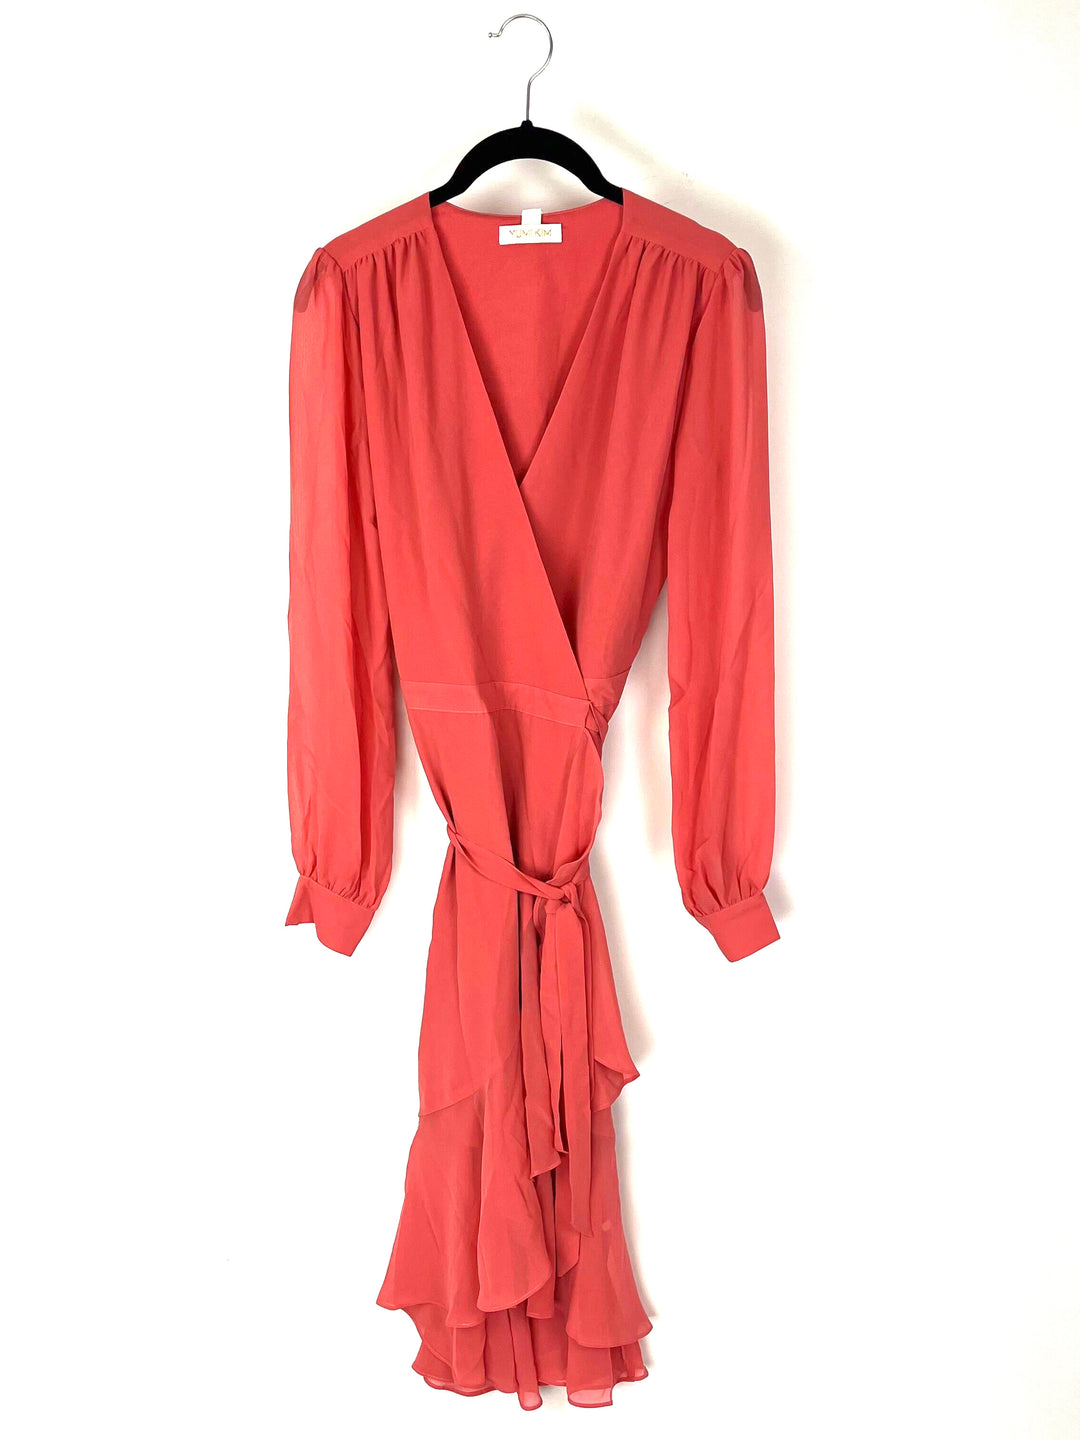 Coral Long Sleeve Dress - Size 0 and 2